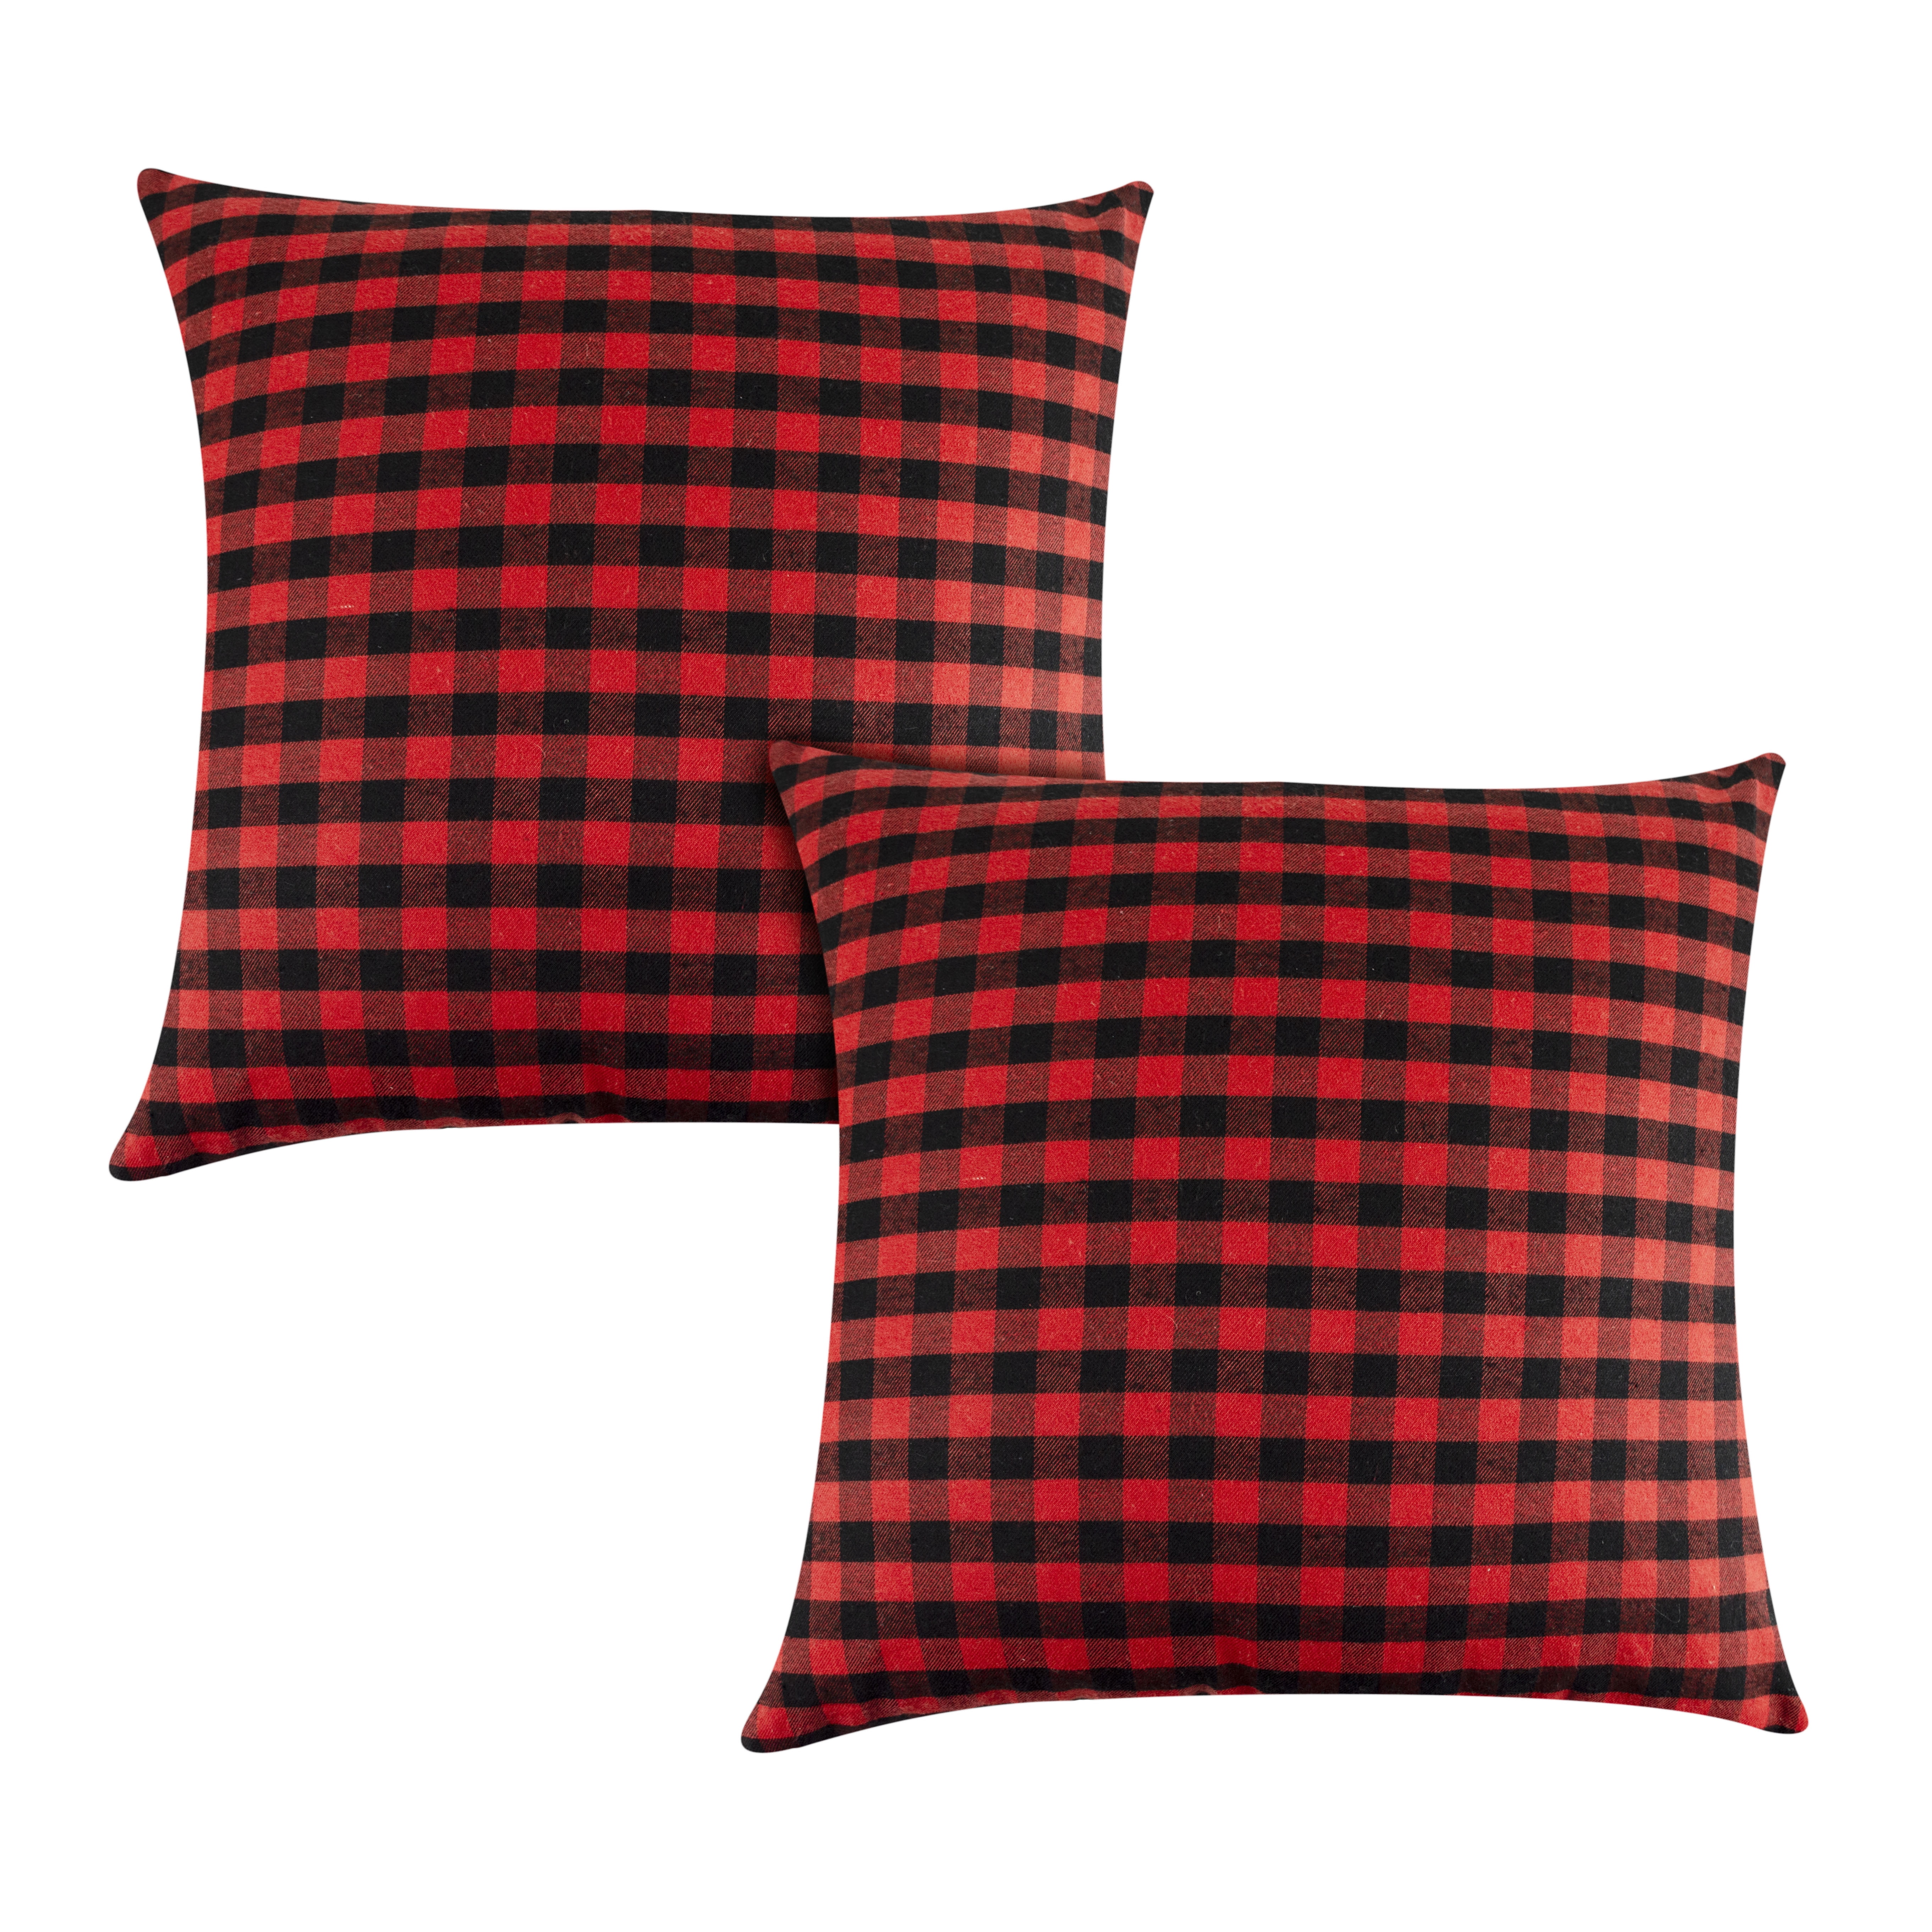 Gingham Red and White Checked with Table Check Decorative Pillow Case Home Decor Square 18x18 Inches Pillowcase